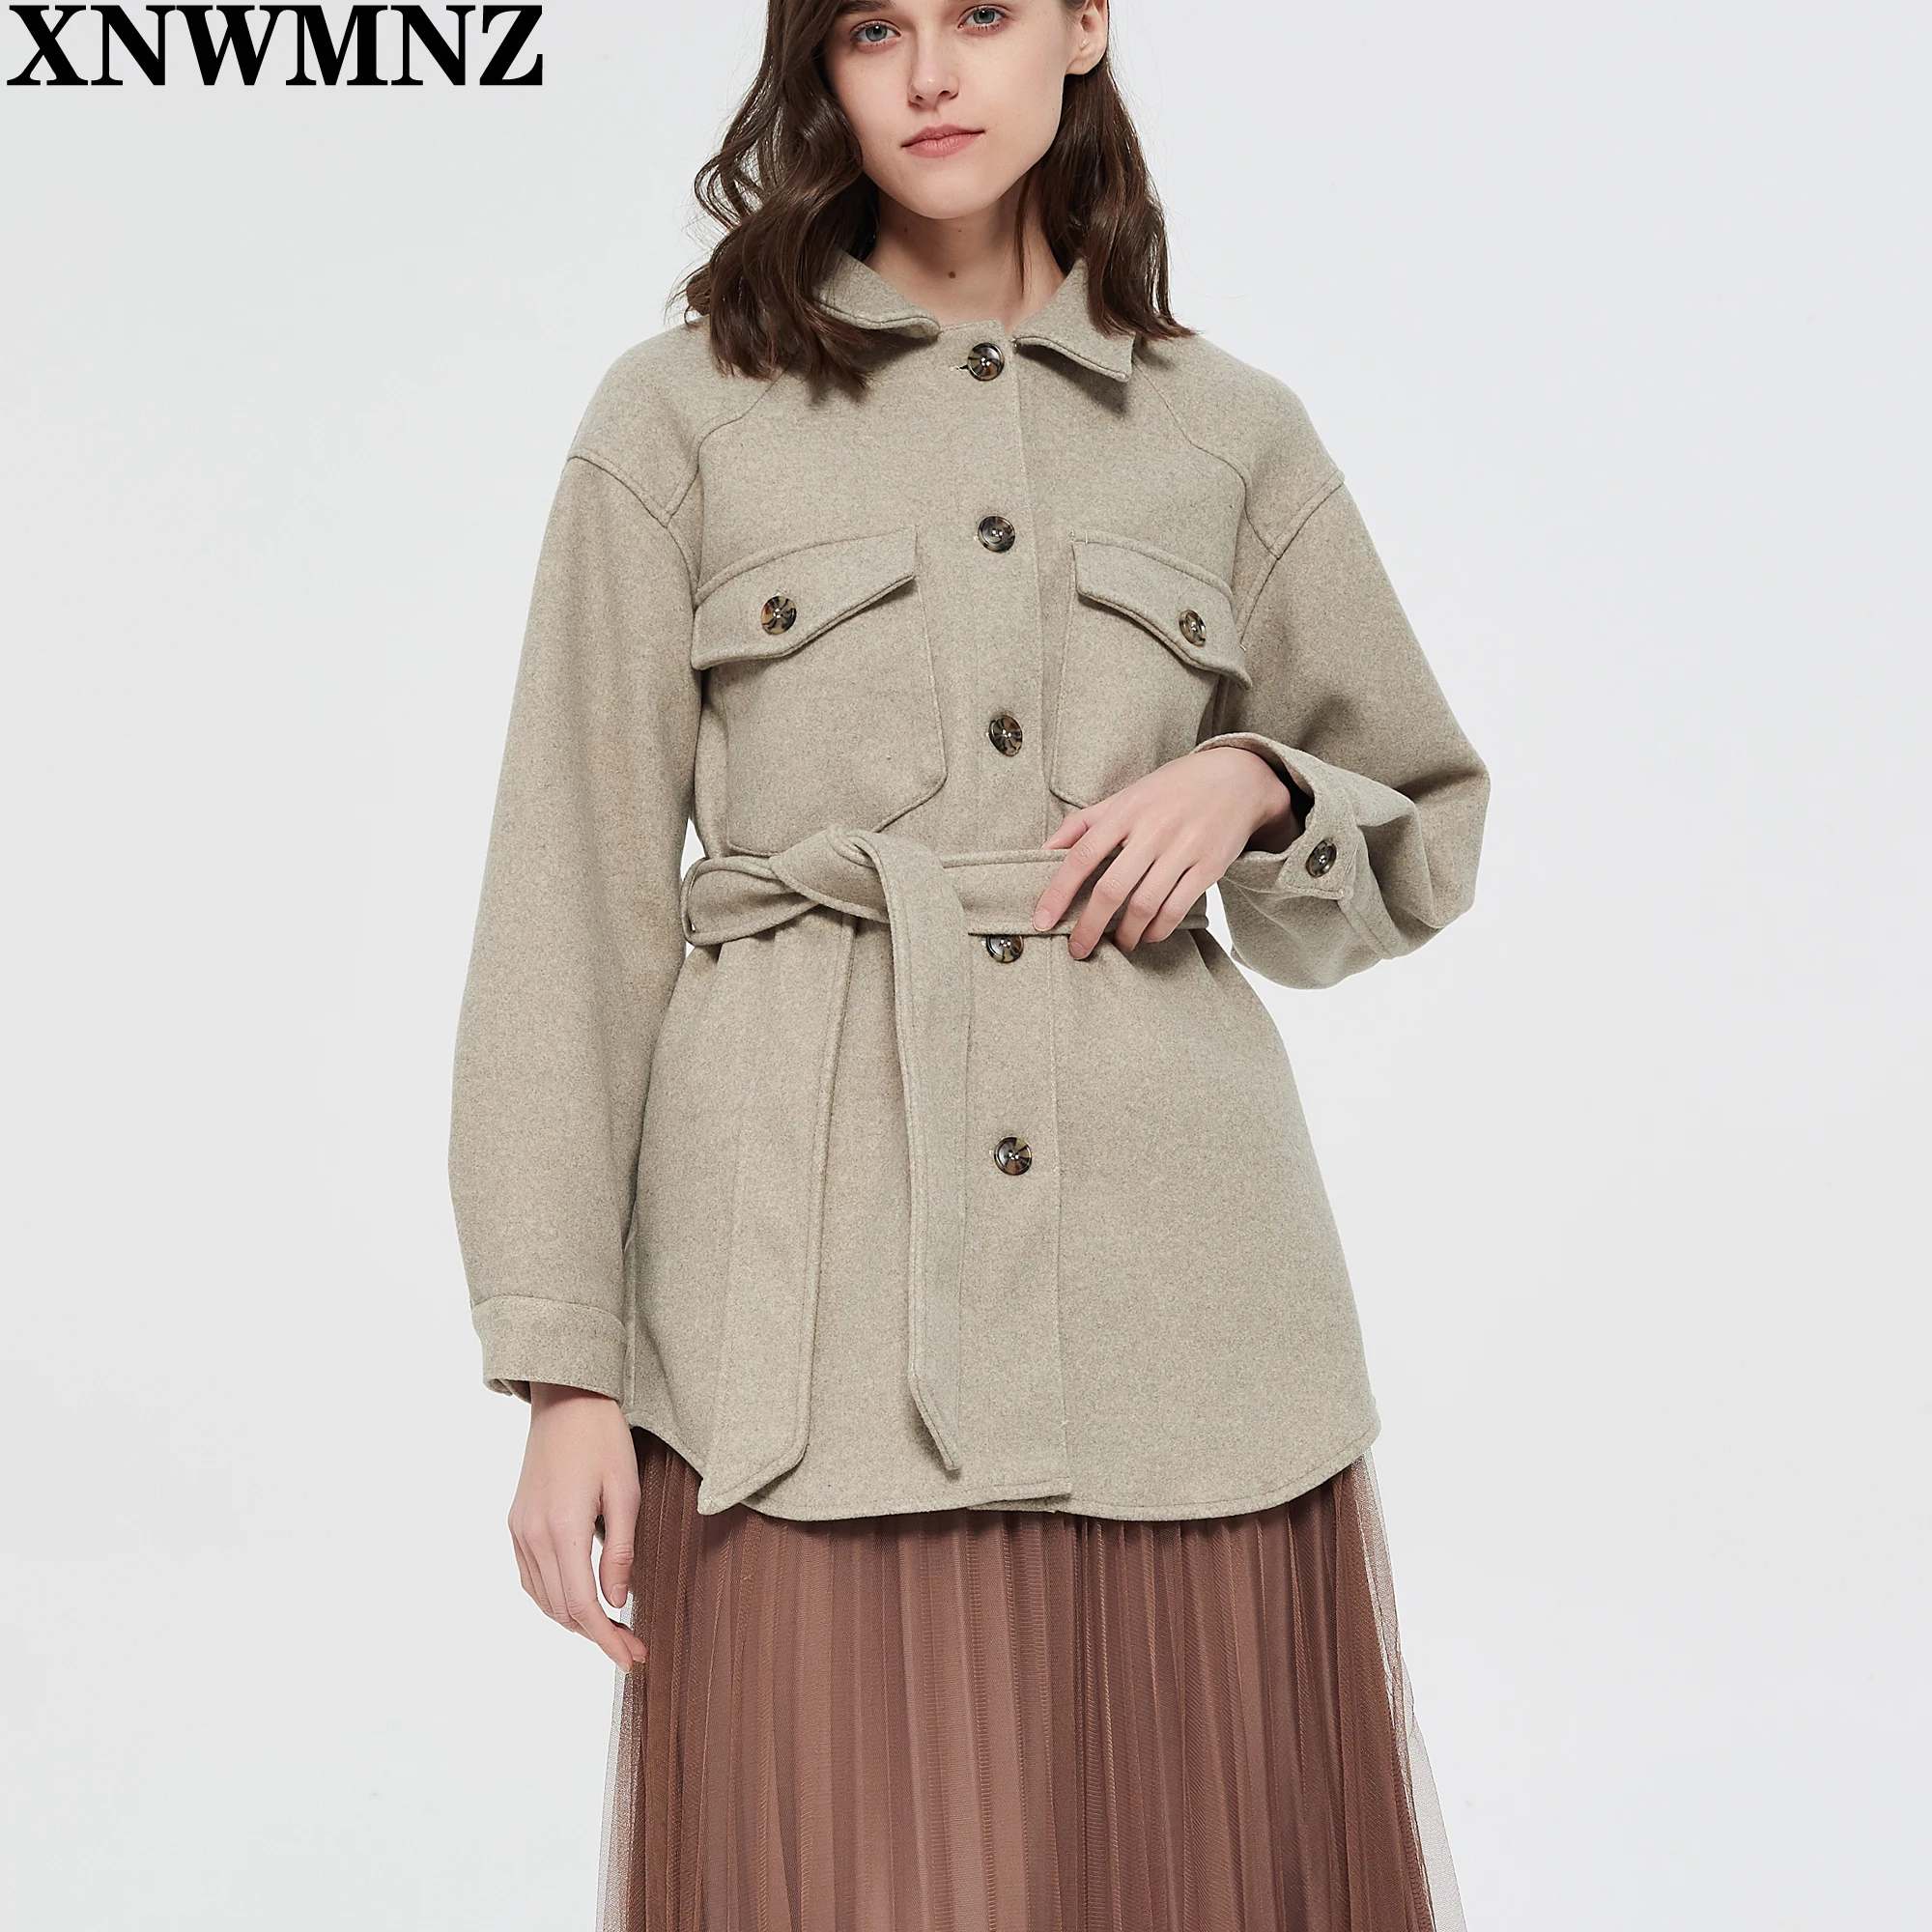 XNWMNZ Women 2021 Fashion With Belt Loose Woolen Jacket Coat Vintage Long Sleeve Side Pockets Female Outerwear Chic Overcoat spring fall slim chic v neck fashionable simple youth suits pink lady 2021 2 piece shorts suit ol style formal pockets female